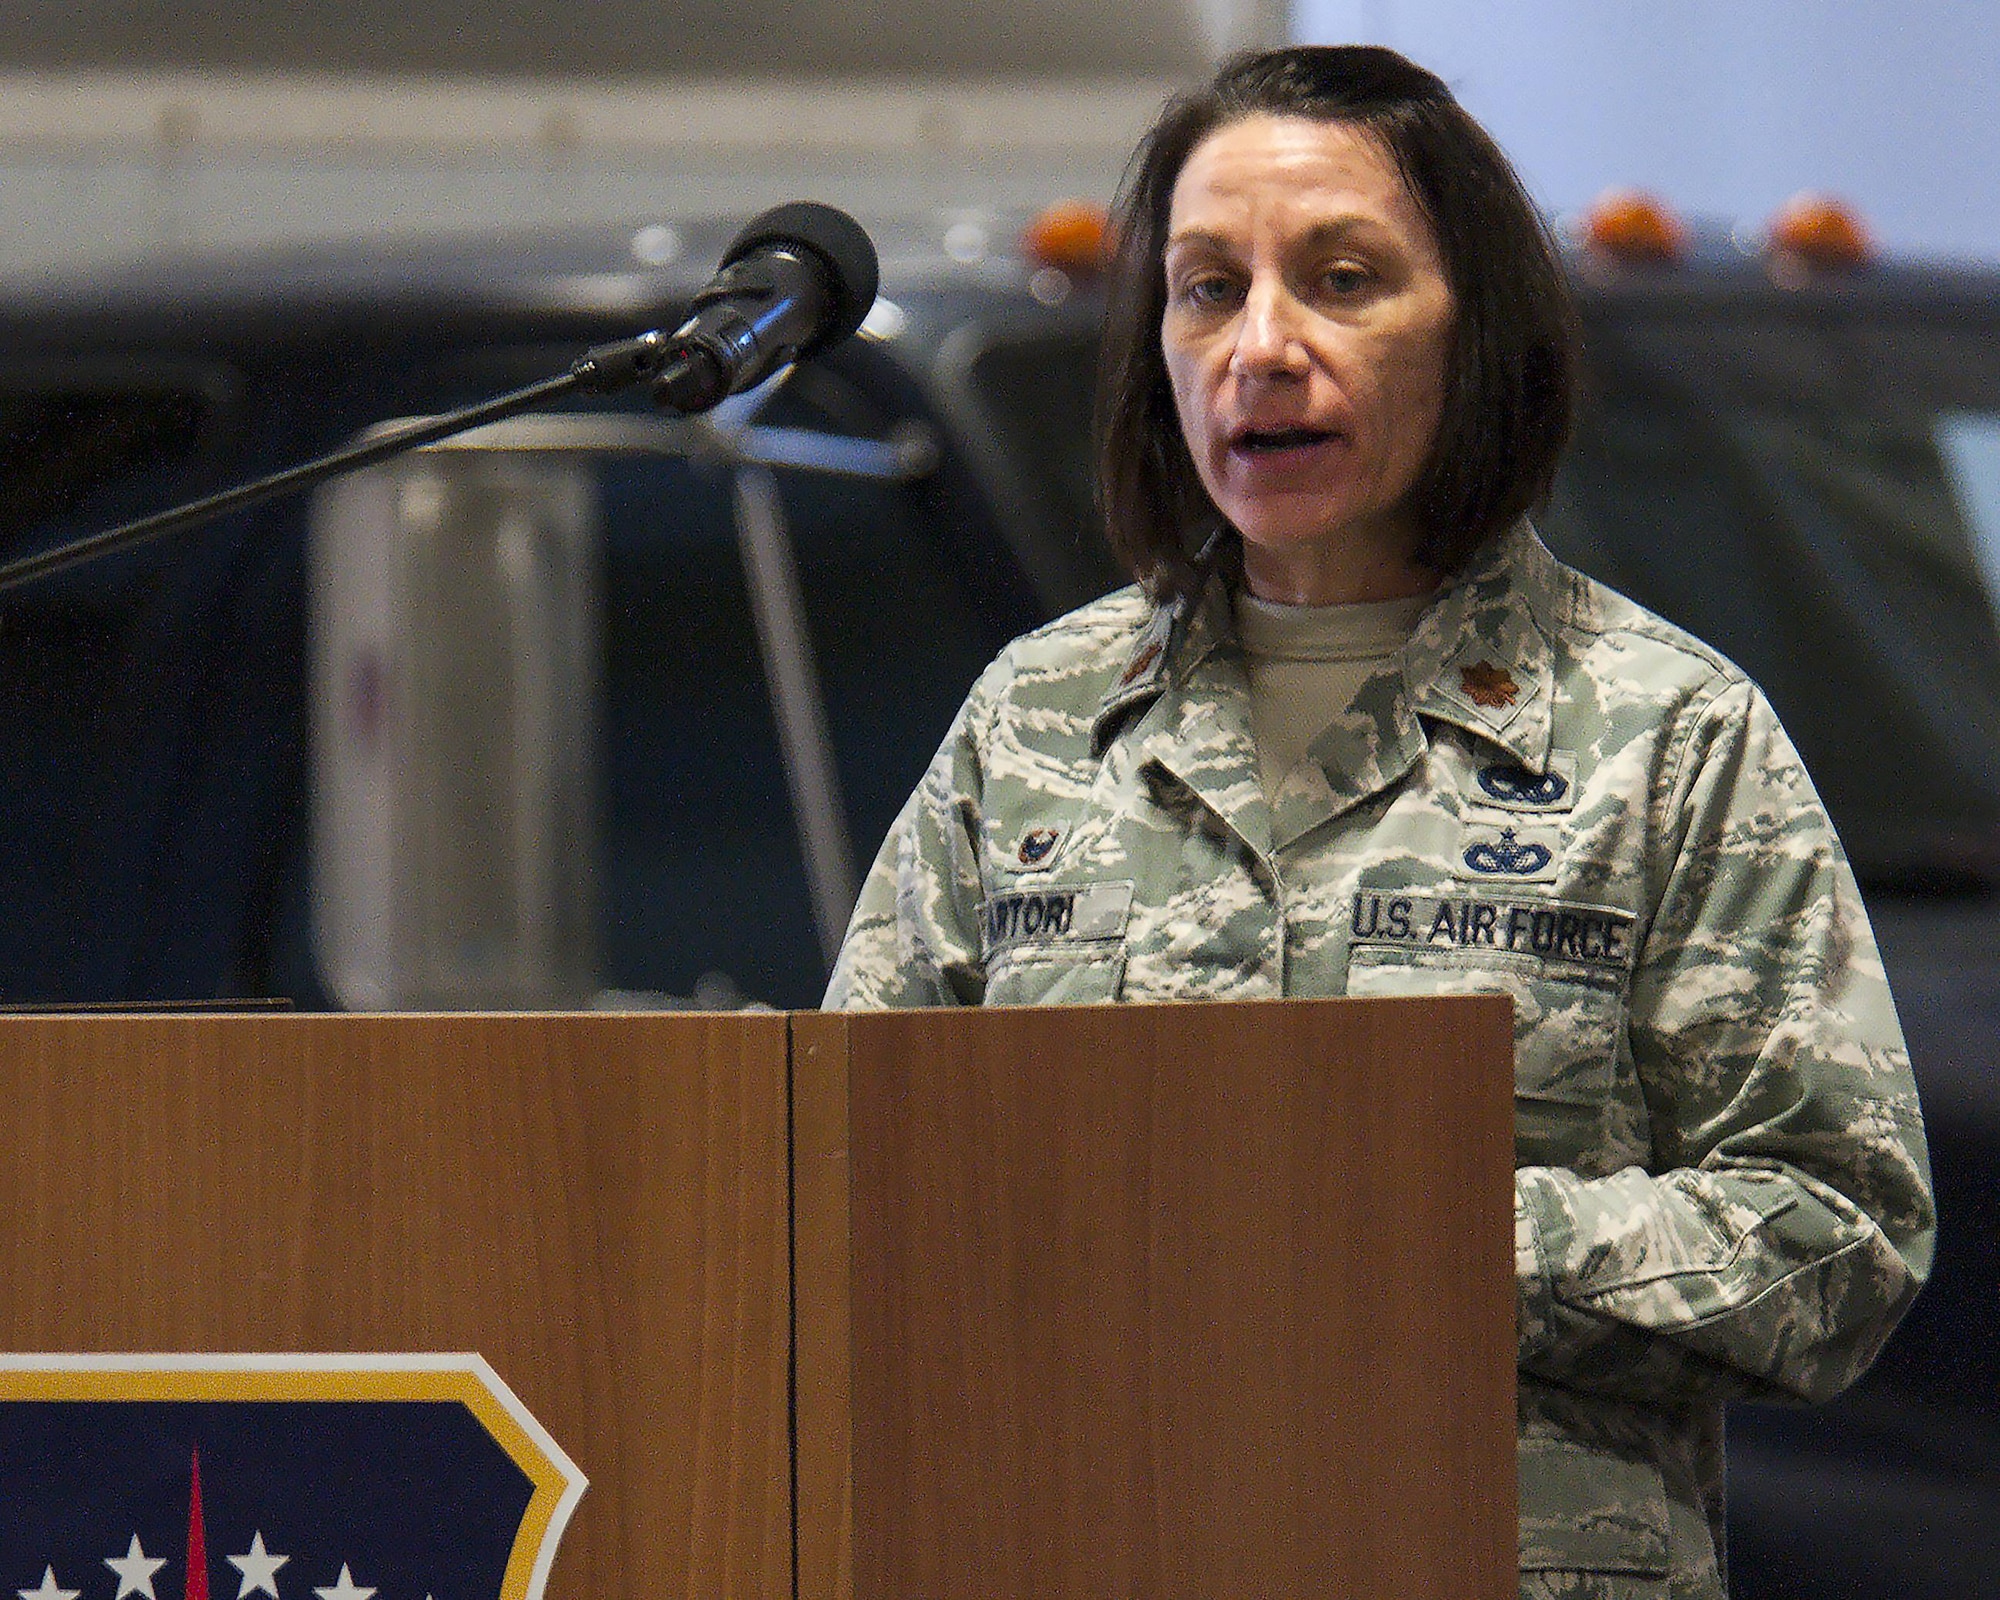 Maj. Jacquie Sartori, 790th Maintenance Squadron commander, speaks to the crowd at the 790th MXS redesignation ceremony Jan. 27, 2016, in the 90th Maintenance Group Maintenance High Bay on F.E. Warren Air Force Base, Wyo. Sartori became the first commander of the 790th MXS when the designation was created to replace the 90th Maintenance Operations Squadron — a change that brings the squadron in line with the naming conventions of maintenance squadrons throughout the Air Force. (U.S. Air Force photo by Senior Airman Jason Wiese)